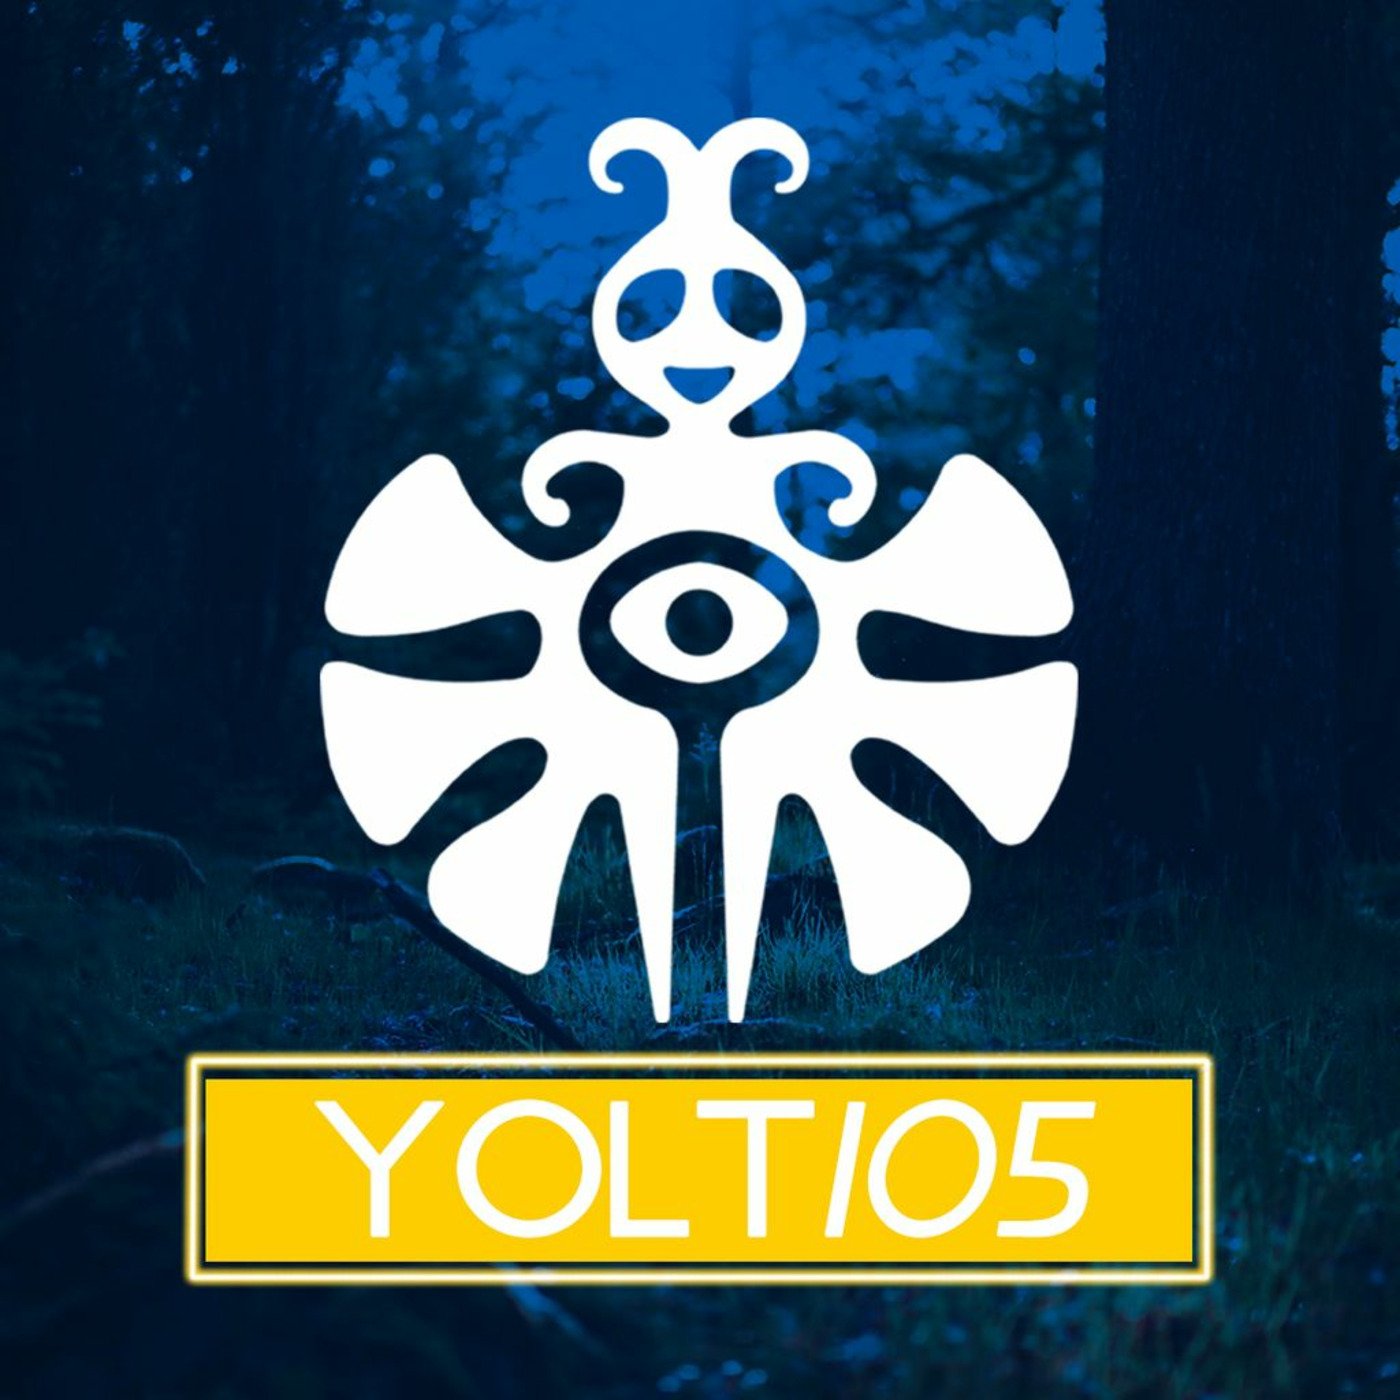 You Only Live Trance Episode 105 (#YOLT105) - Ness